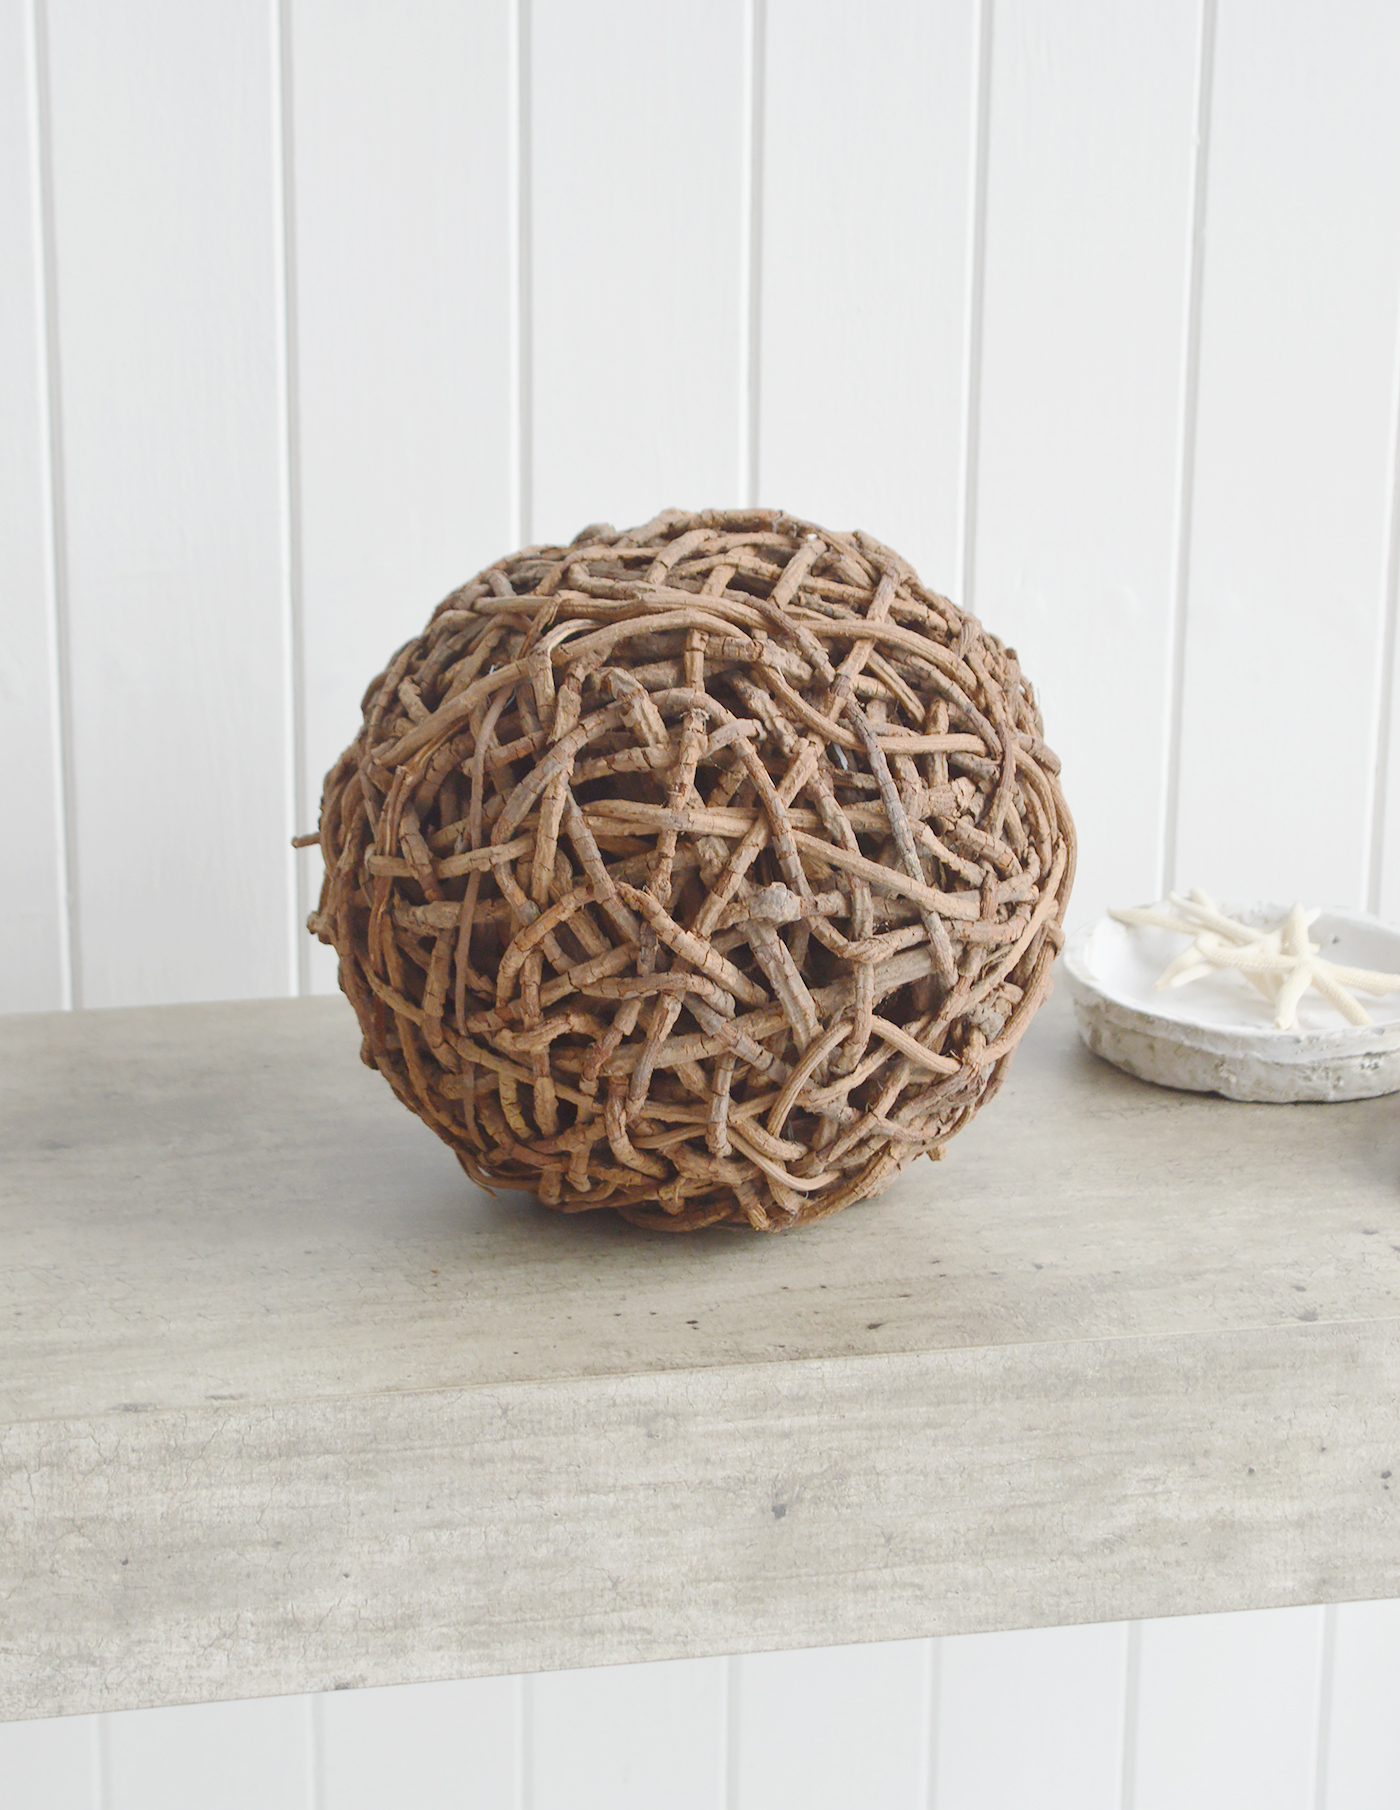 White Furniture and accessories for the home. Twine Ball  - Coffee Table, Shelf and Console styling for New England, Country Farmhouse and coastal home interior decor